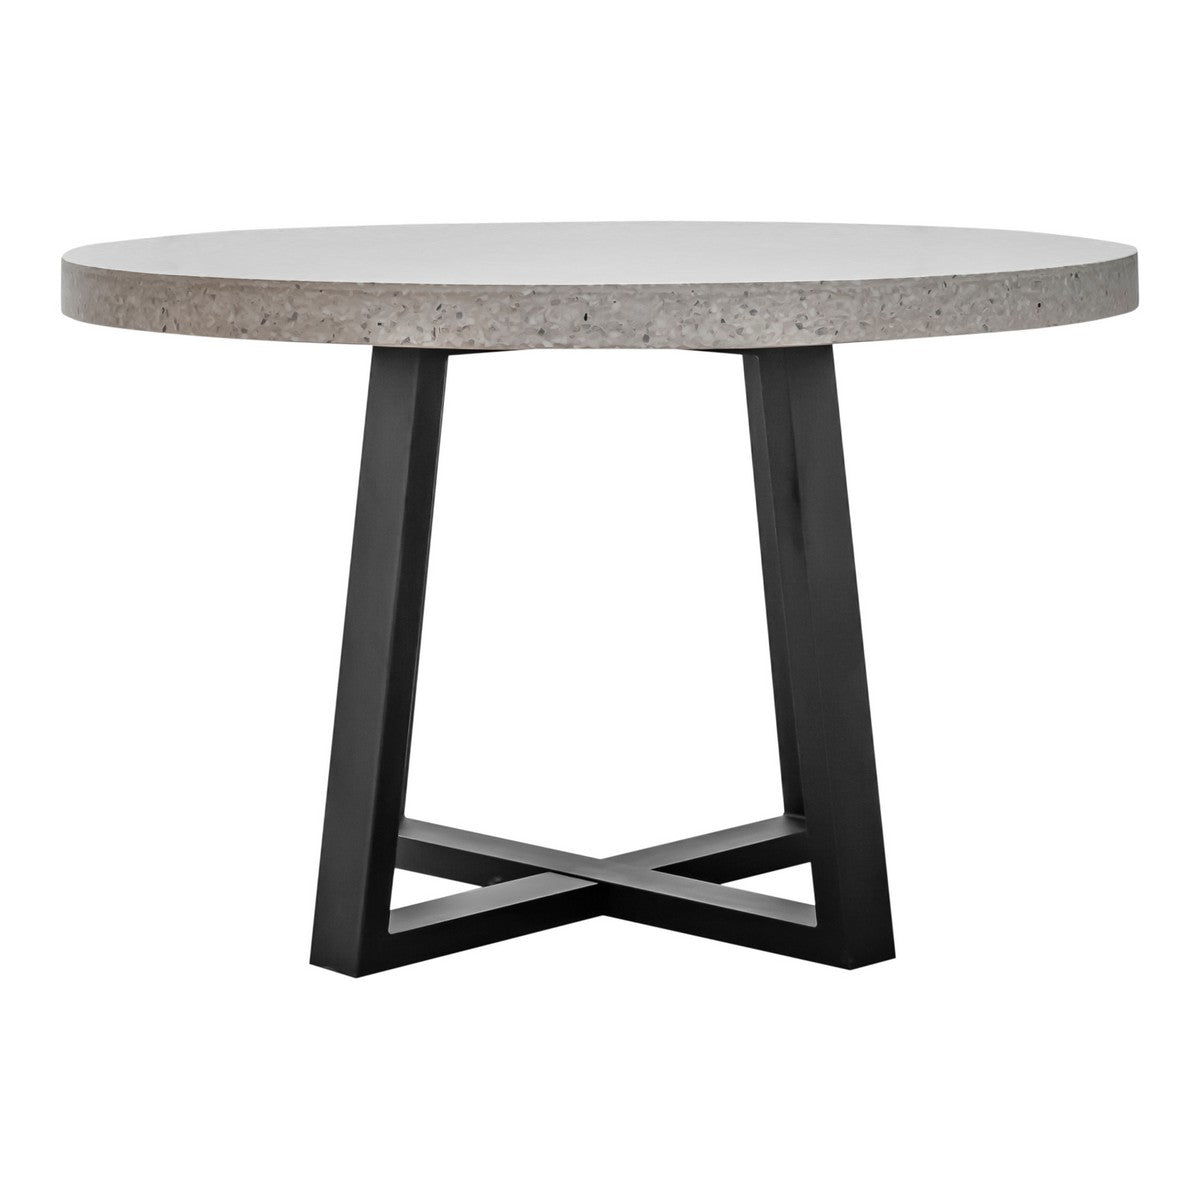 Moe's Home Collection Vault Dining Table White - VH-1002-18 - Moe's Home Collection - Dining Tables - Minimal And Modern - 1